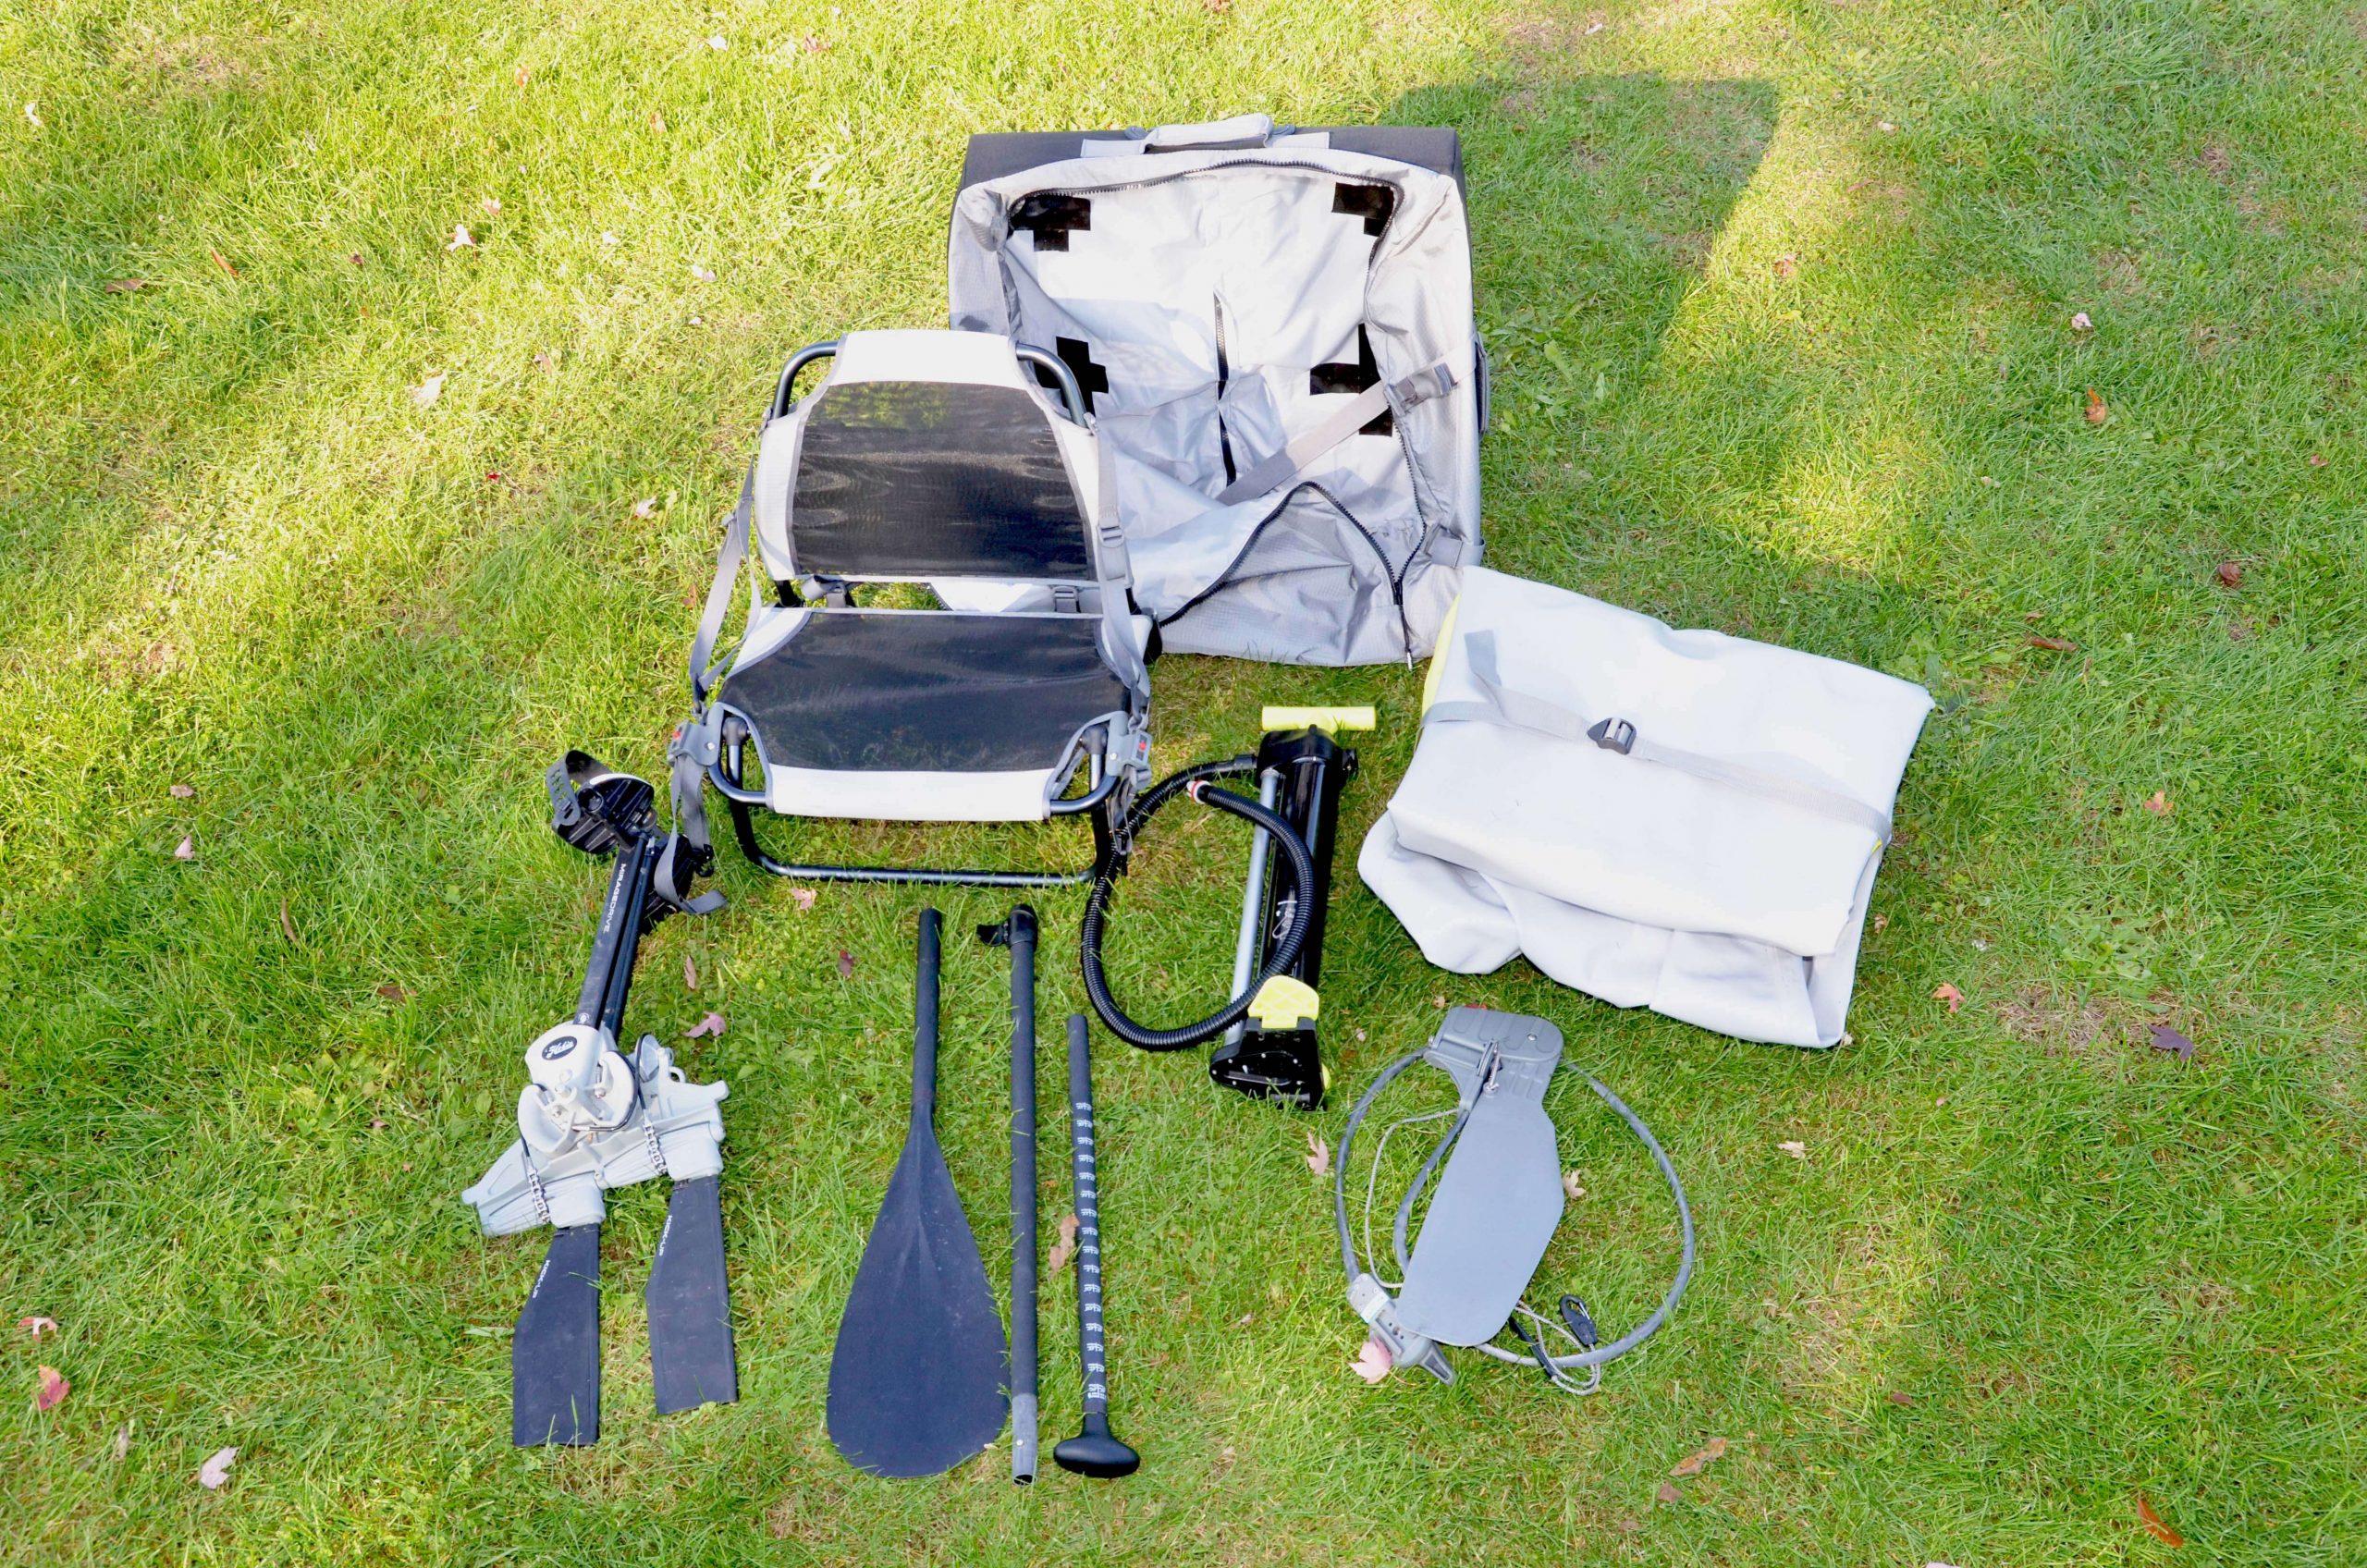 The iTrek MirageDrive GT with Kick-Up Fins, chair, rudder, pump and three-piece SUP paddle all fit in the iTrek 9 Ultralight’s rolling, soft-side suitcase. Not pictured are a repair kit and electric pump that also come standard and fit in the case.